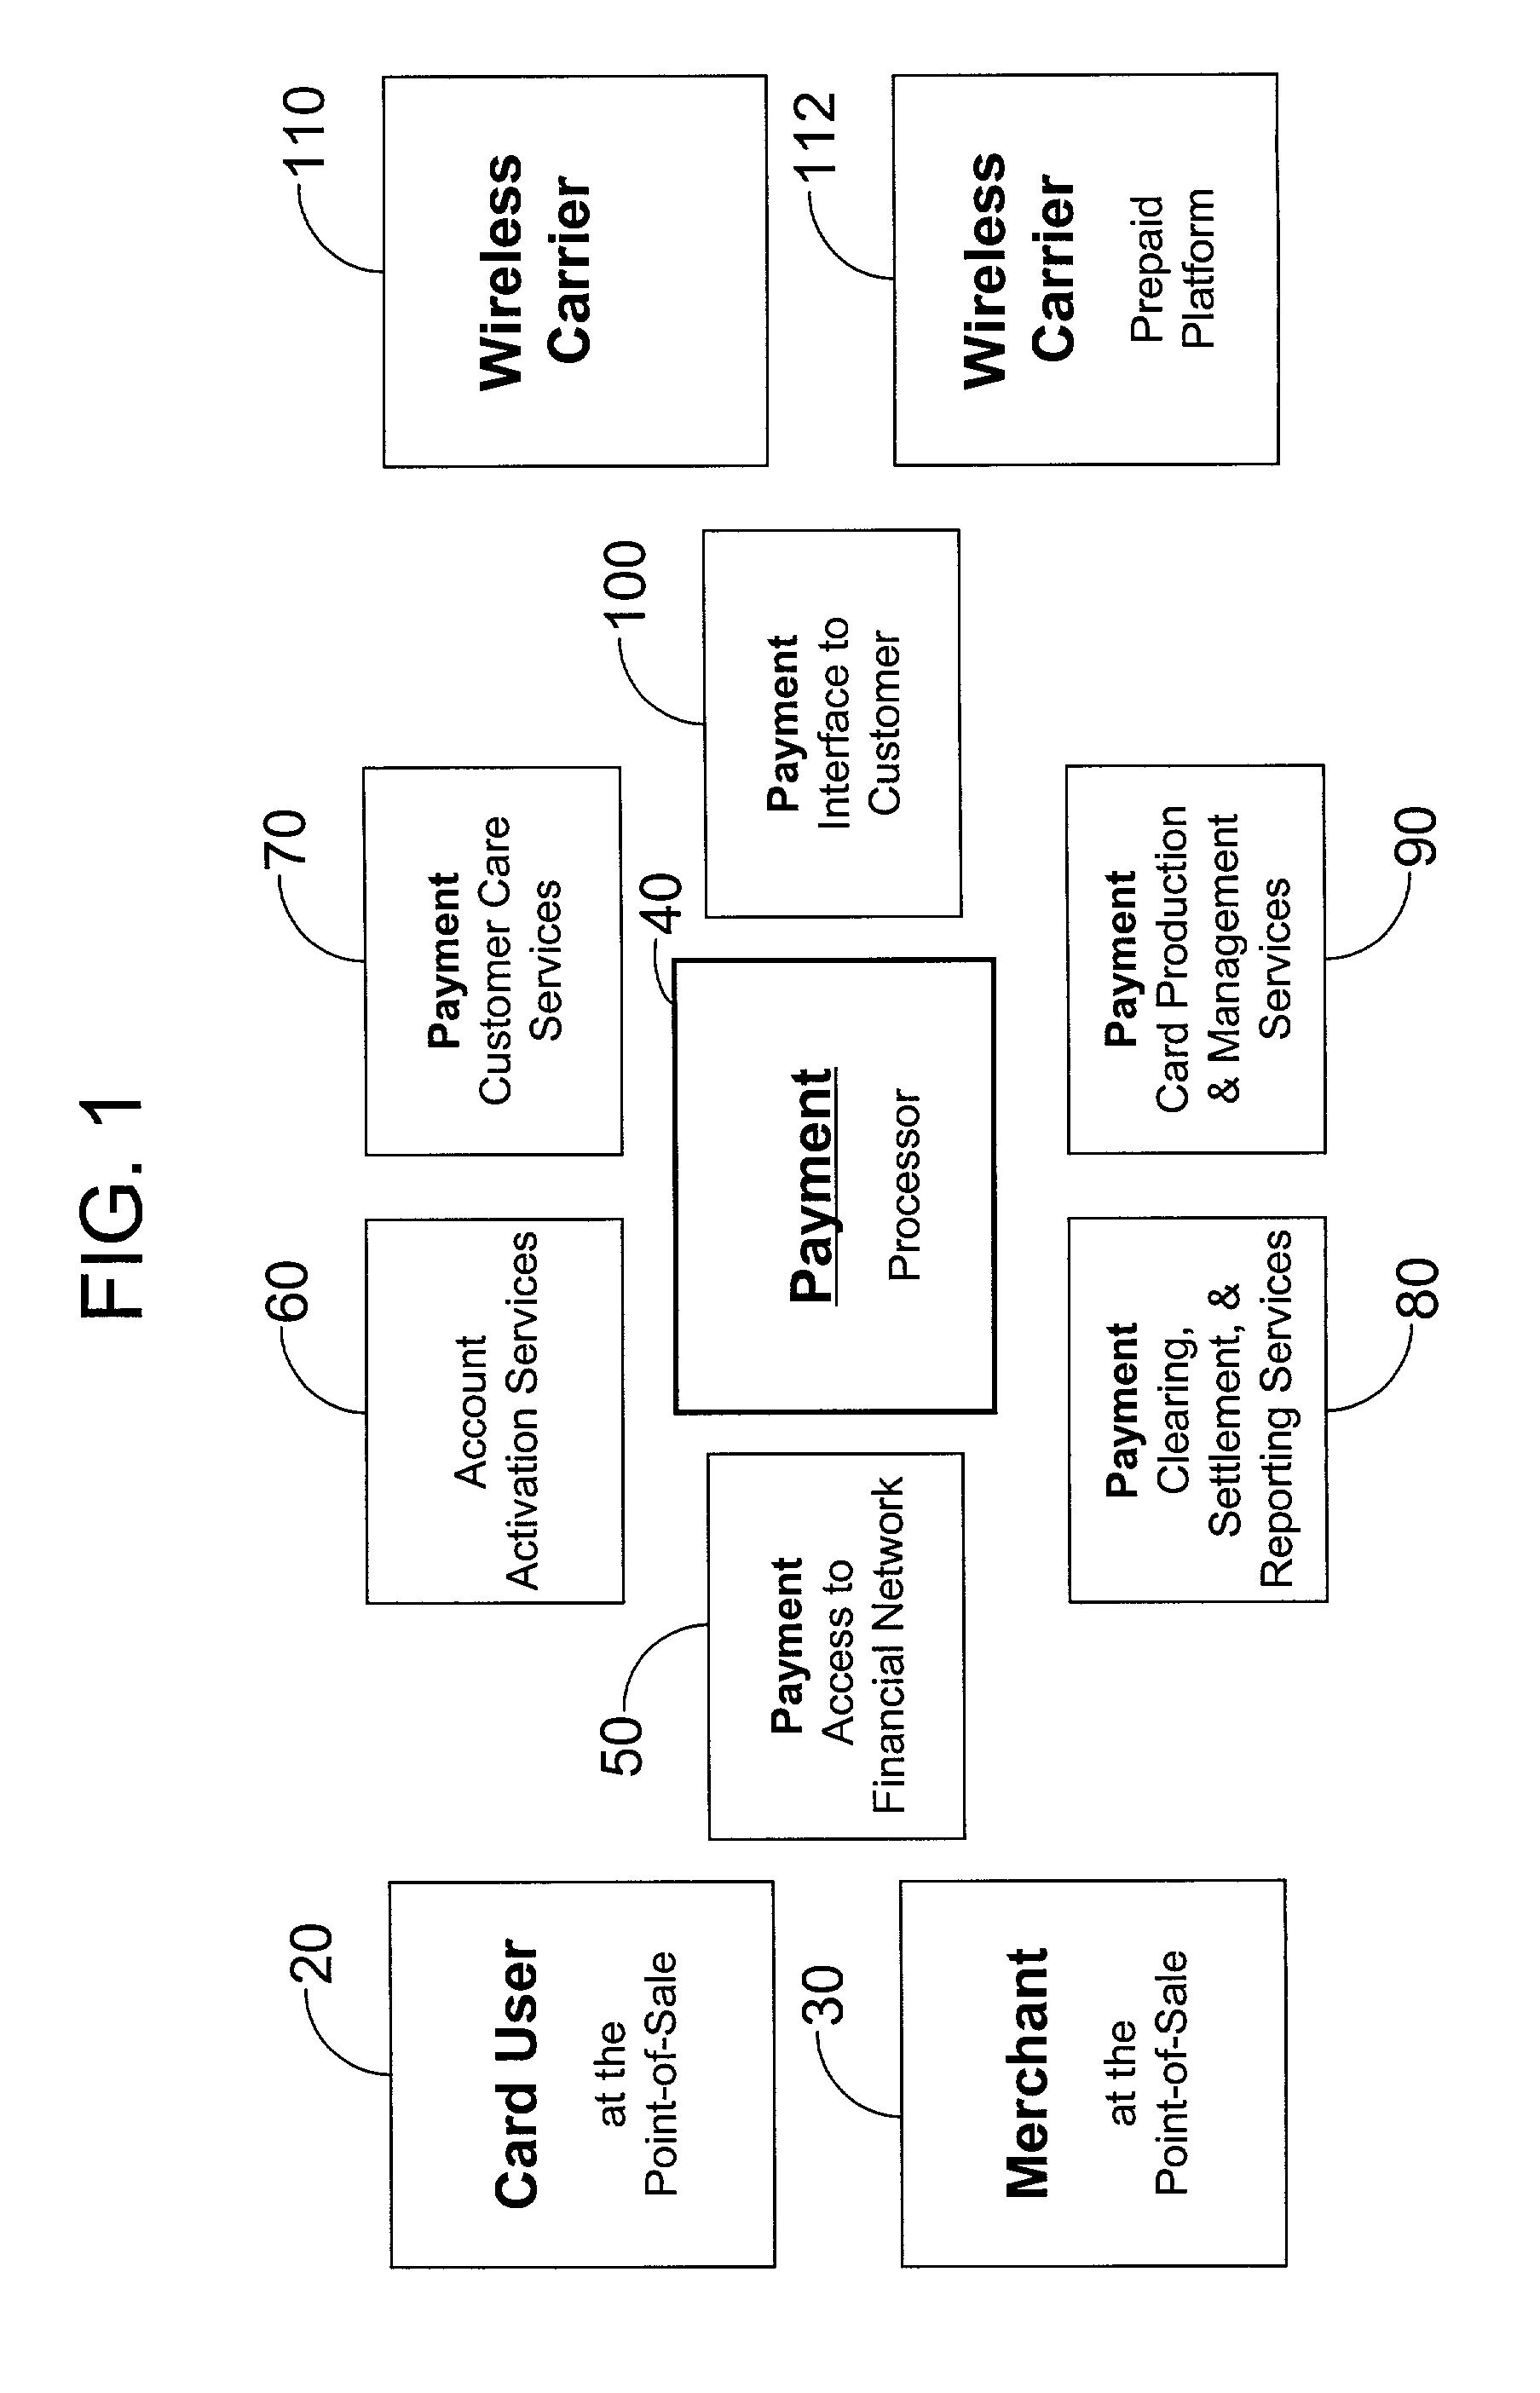 Electronic payment system utilizing intermediary account